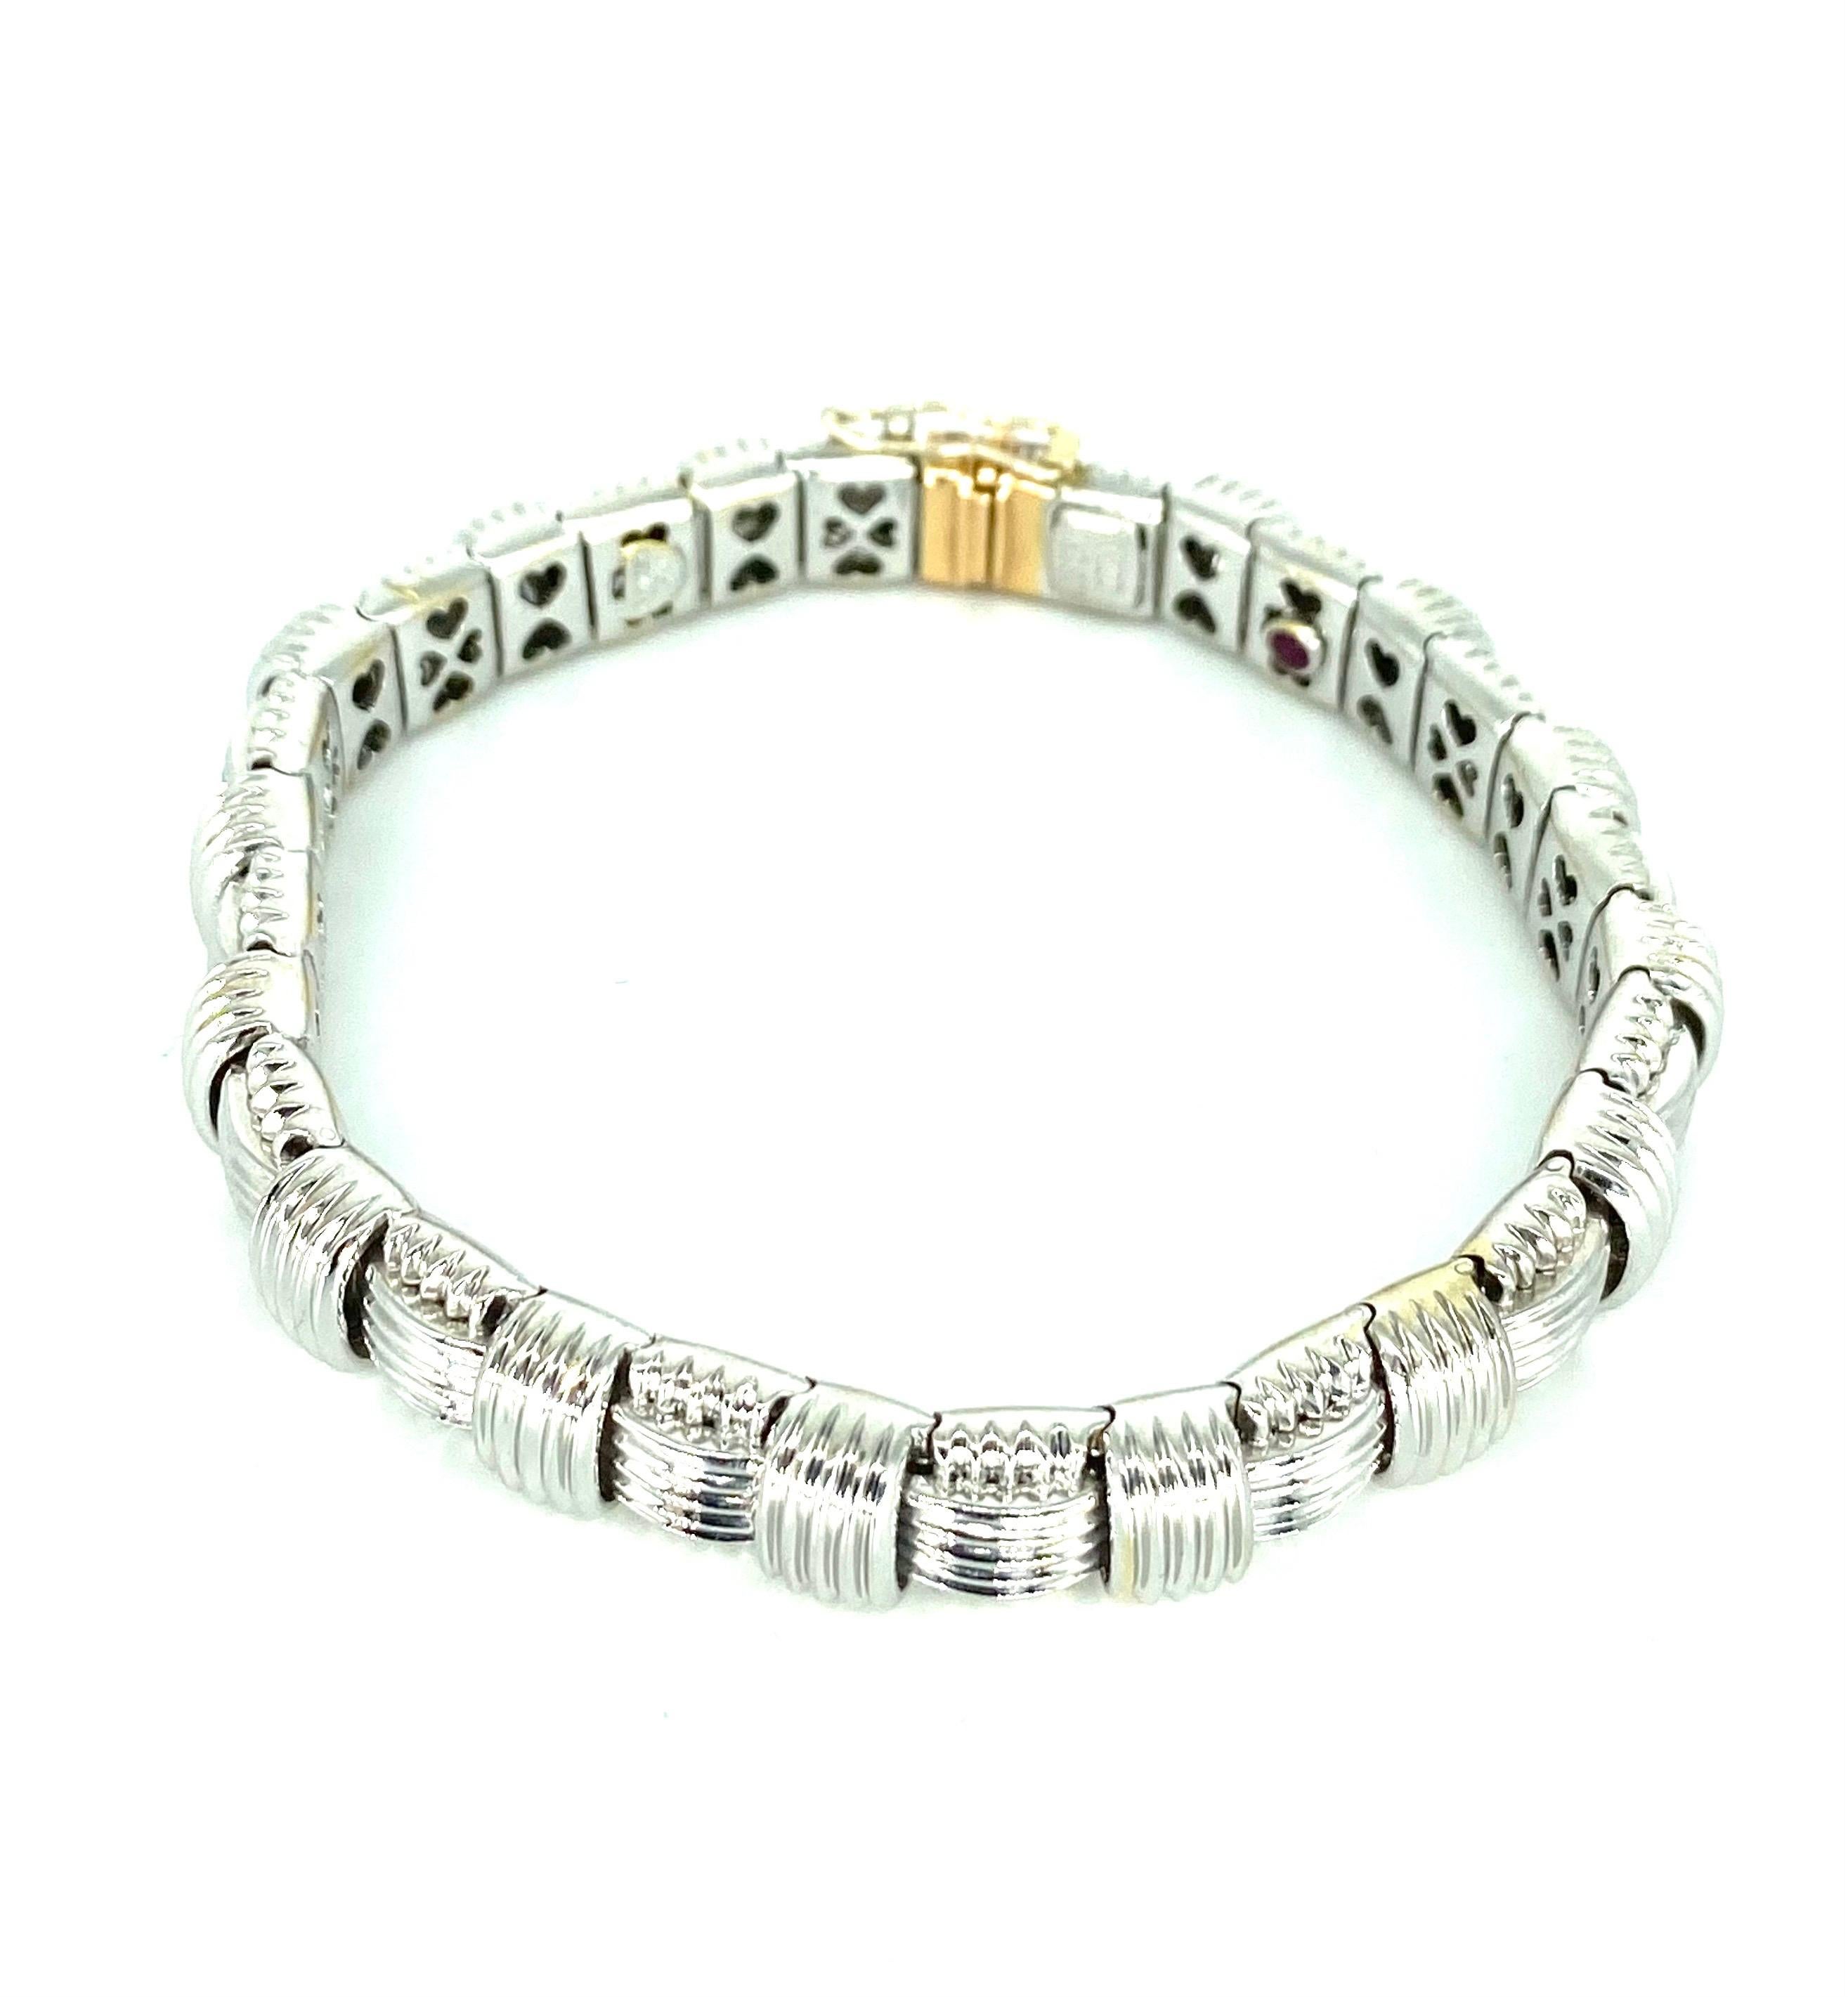 Hallmarks: Roberto Coin 18K Italy

Composition: 18K White Gold with Diamond set in Rose gold

Primary Stone: Diamonds

Bracelet length: 7 Inches

Bracelet width: 8.5mm

Bracelet Weight: 34.9 grams

Bracelet Condition: excellent estate condition,